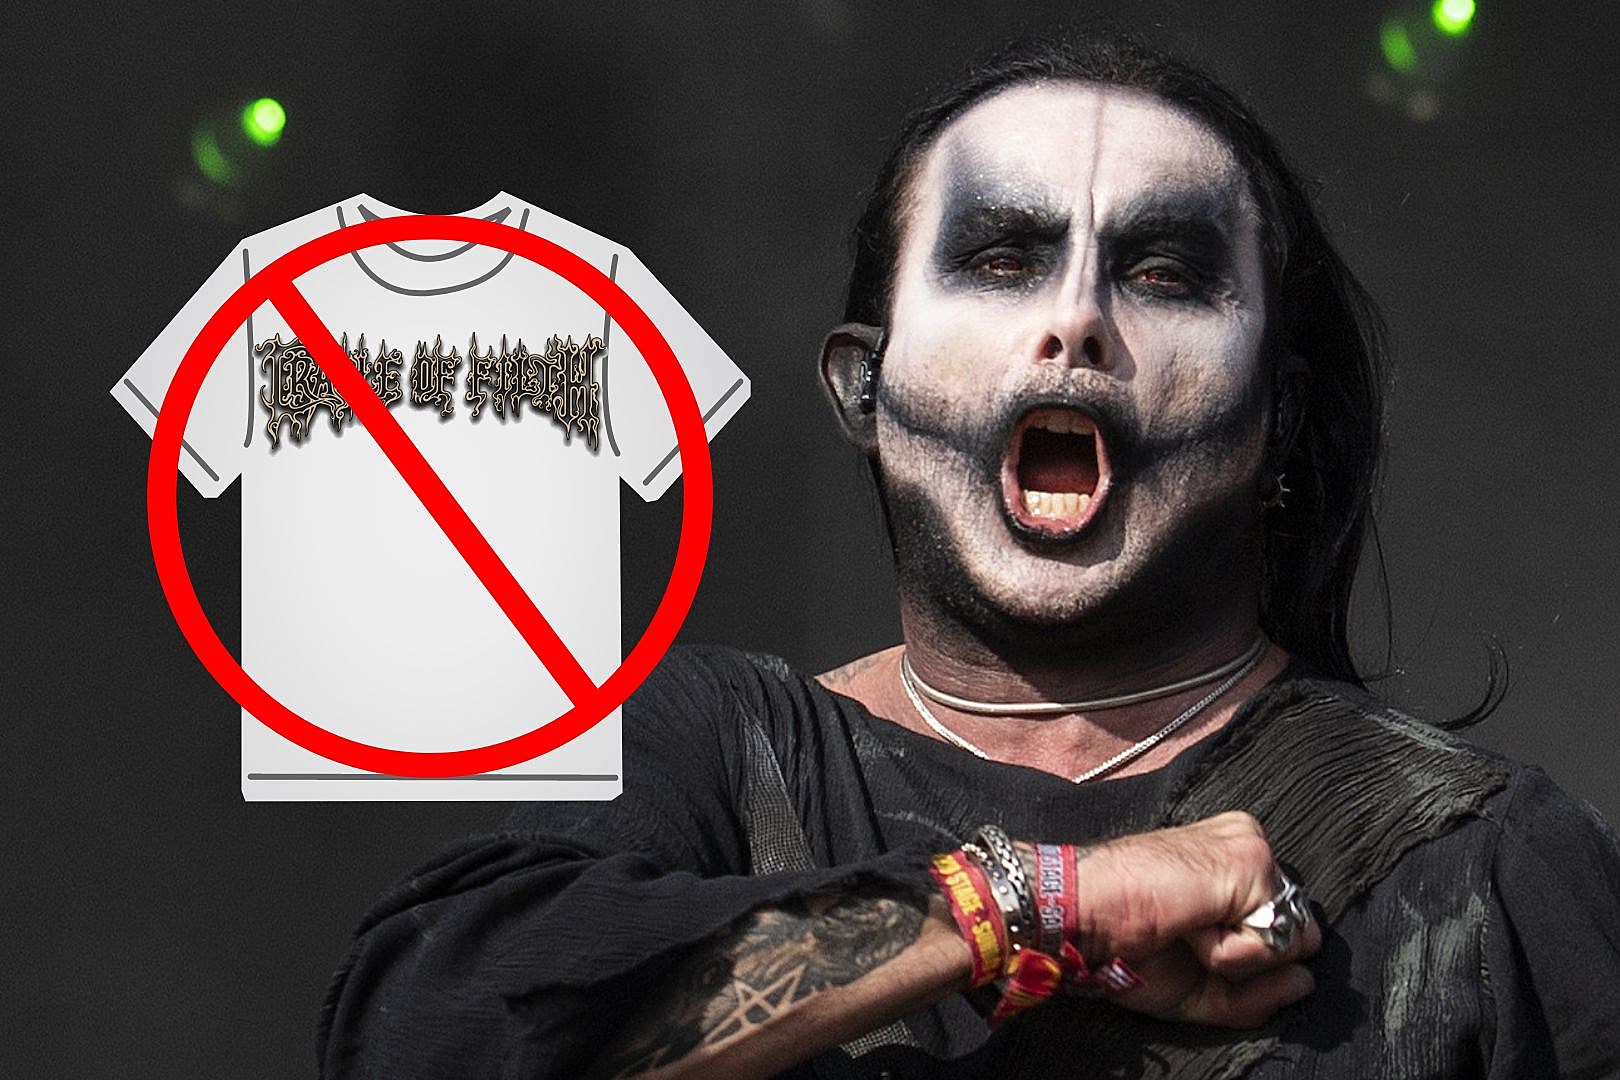 Why Dani Filth Won't Wear Infamous Cradle of Filth Shirt